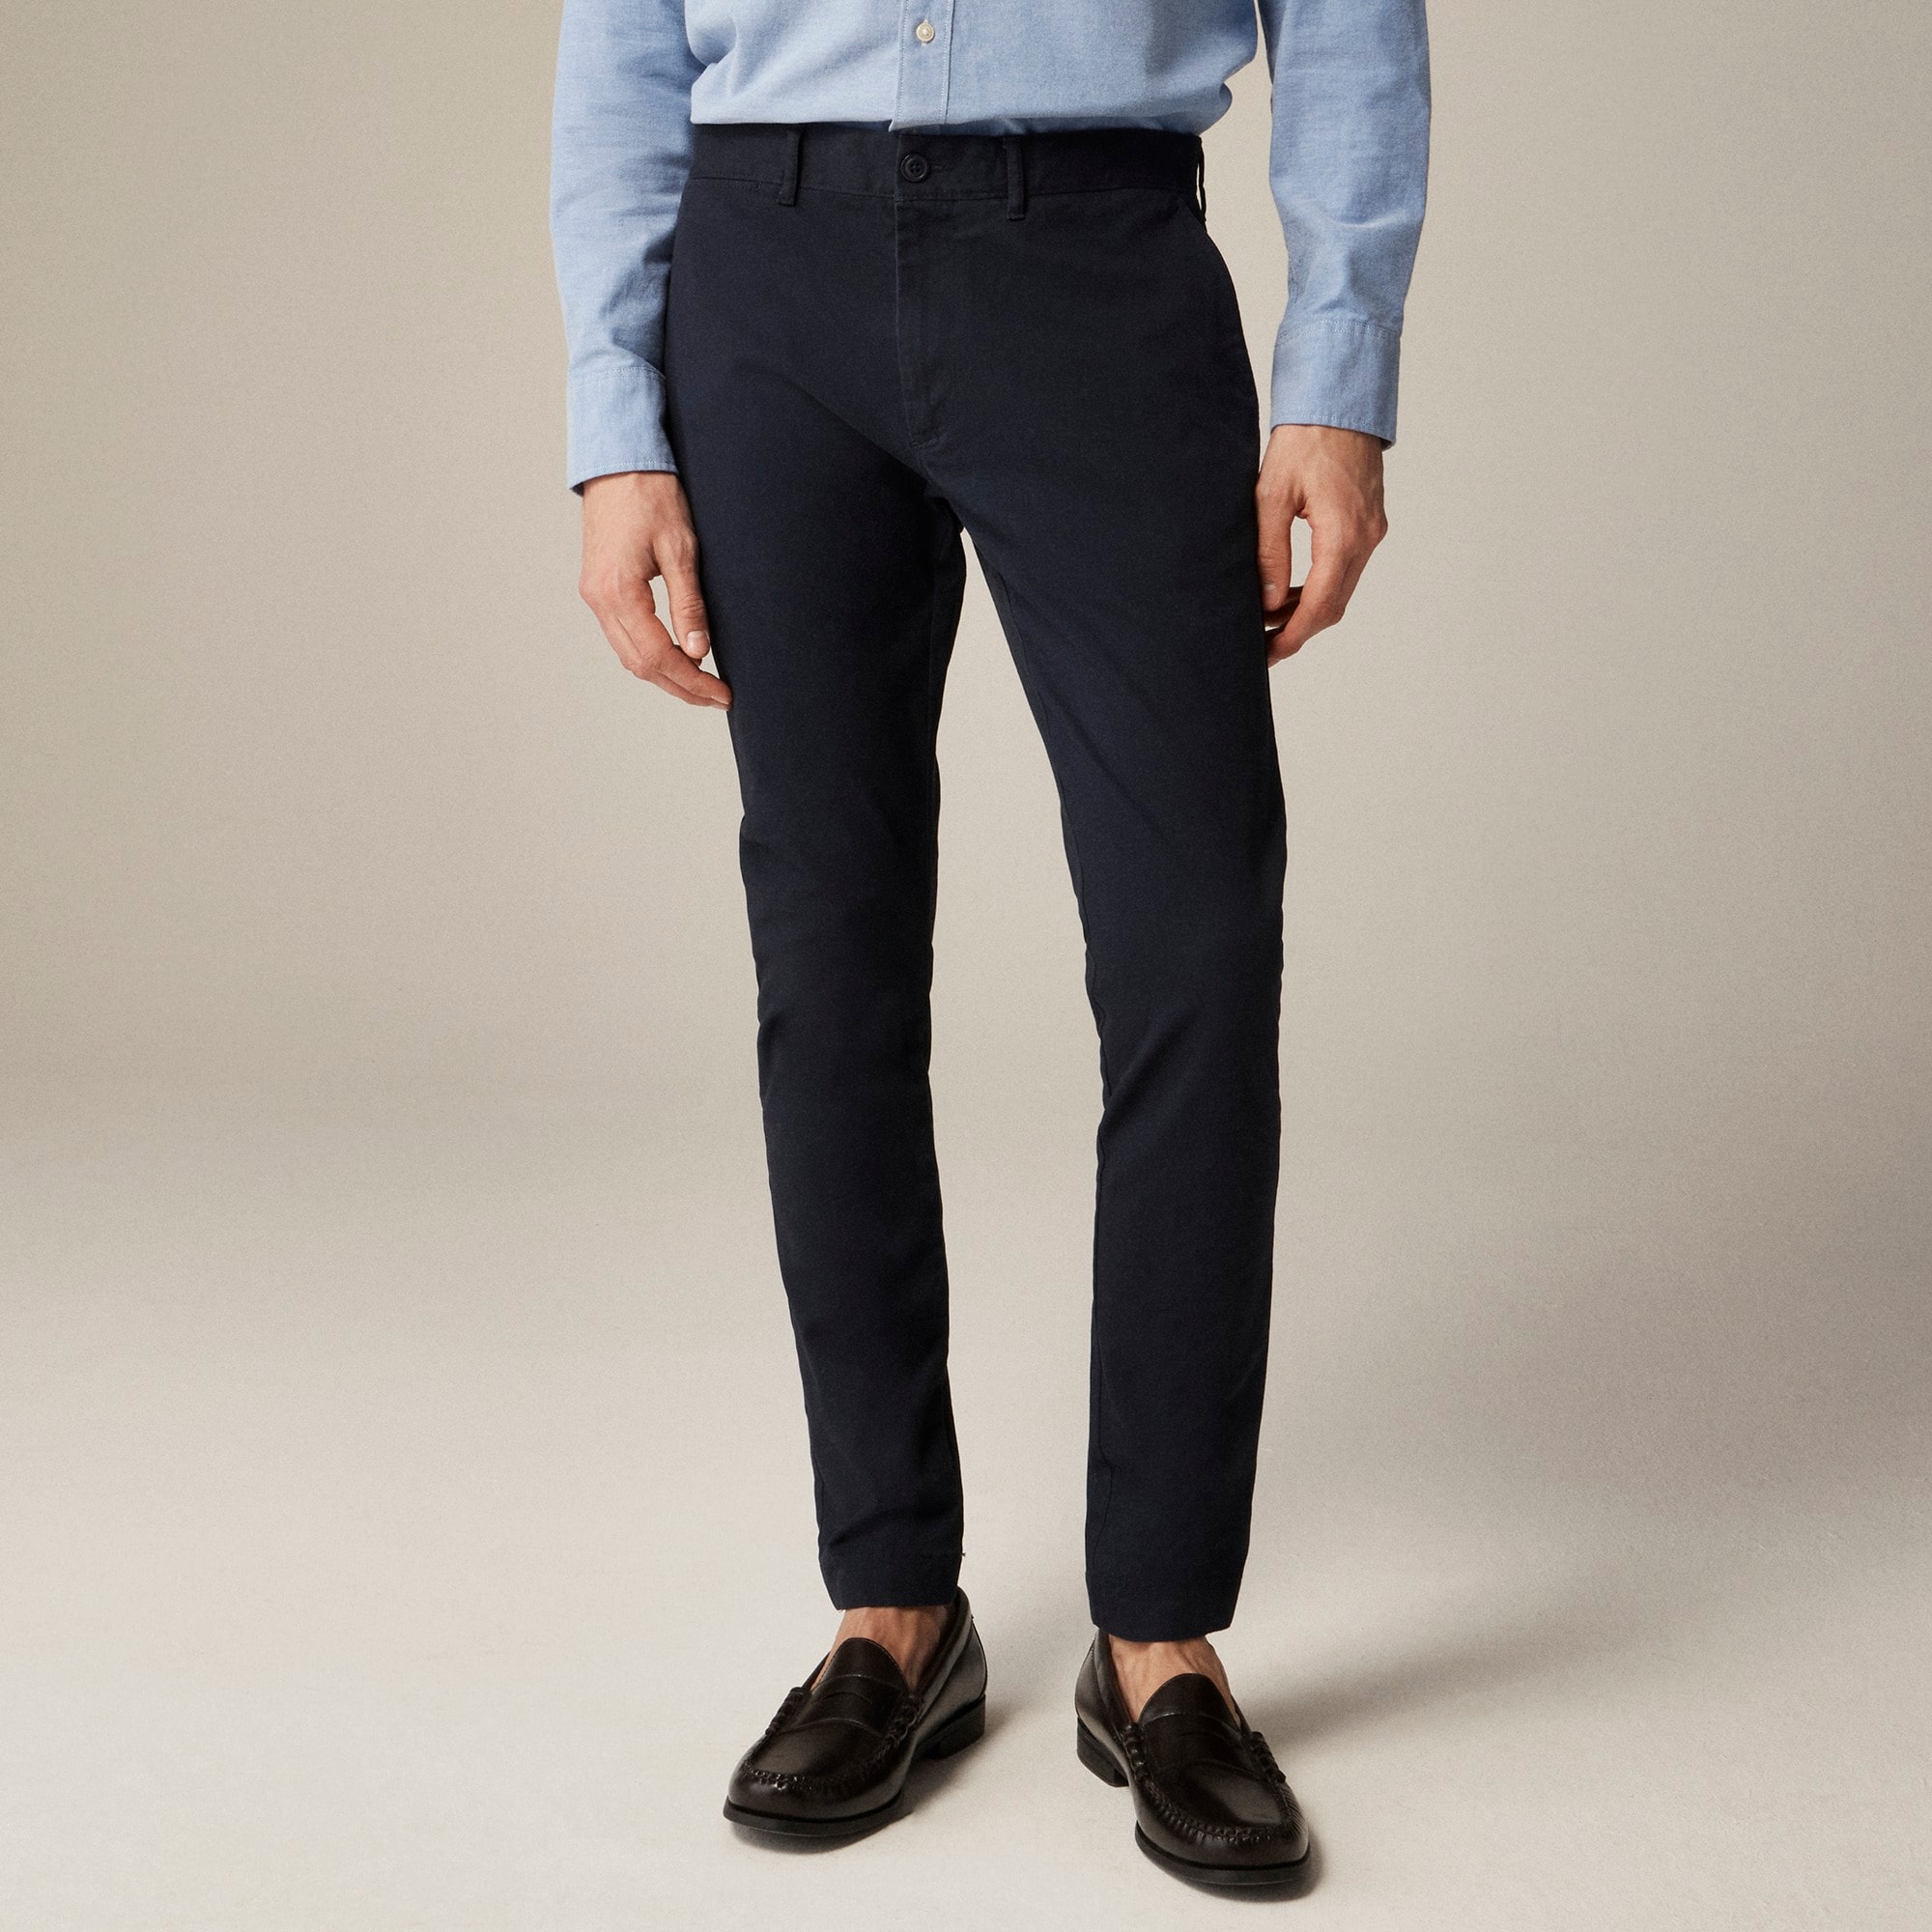 Jcrew 250 skinny-fit pant in stretch chino